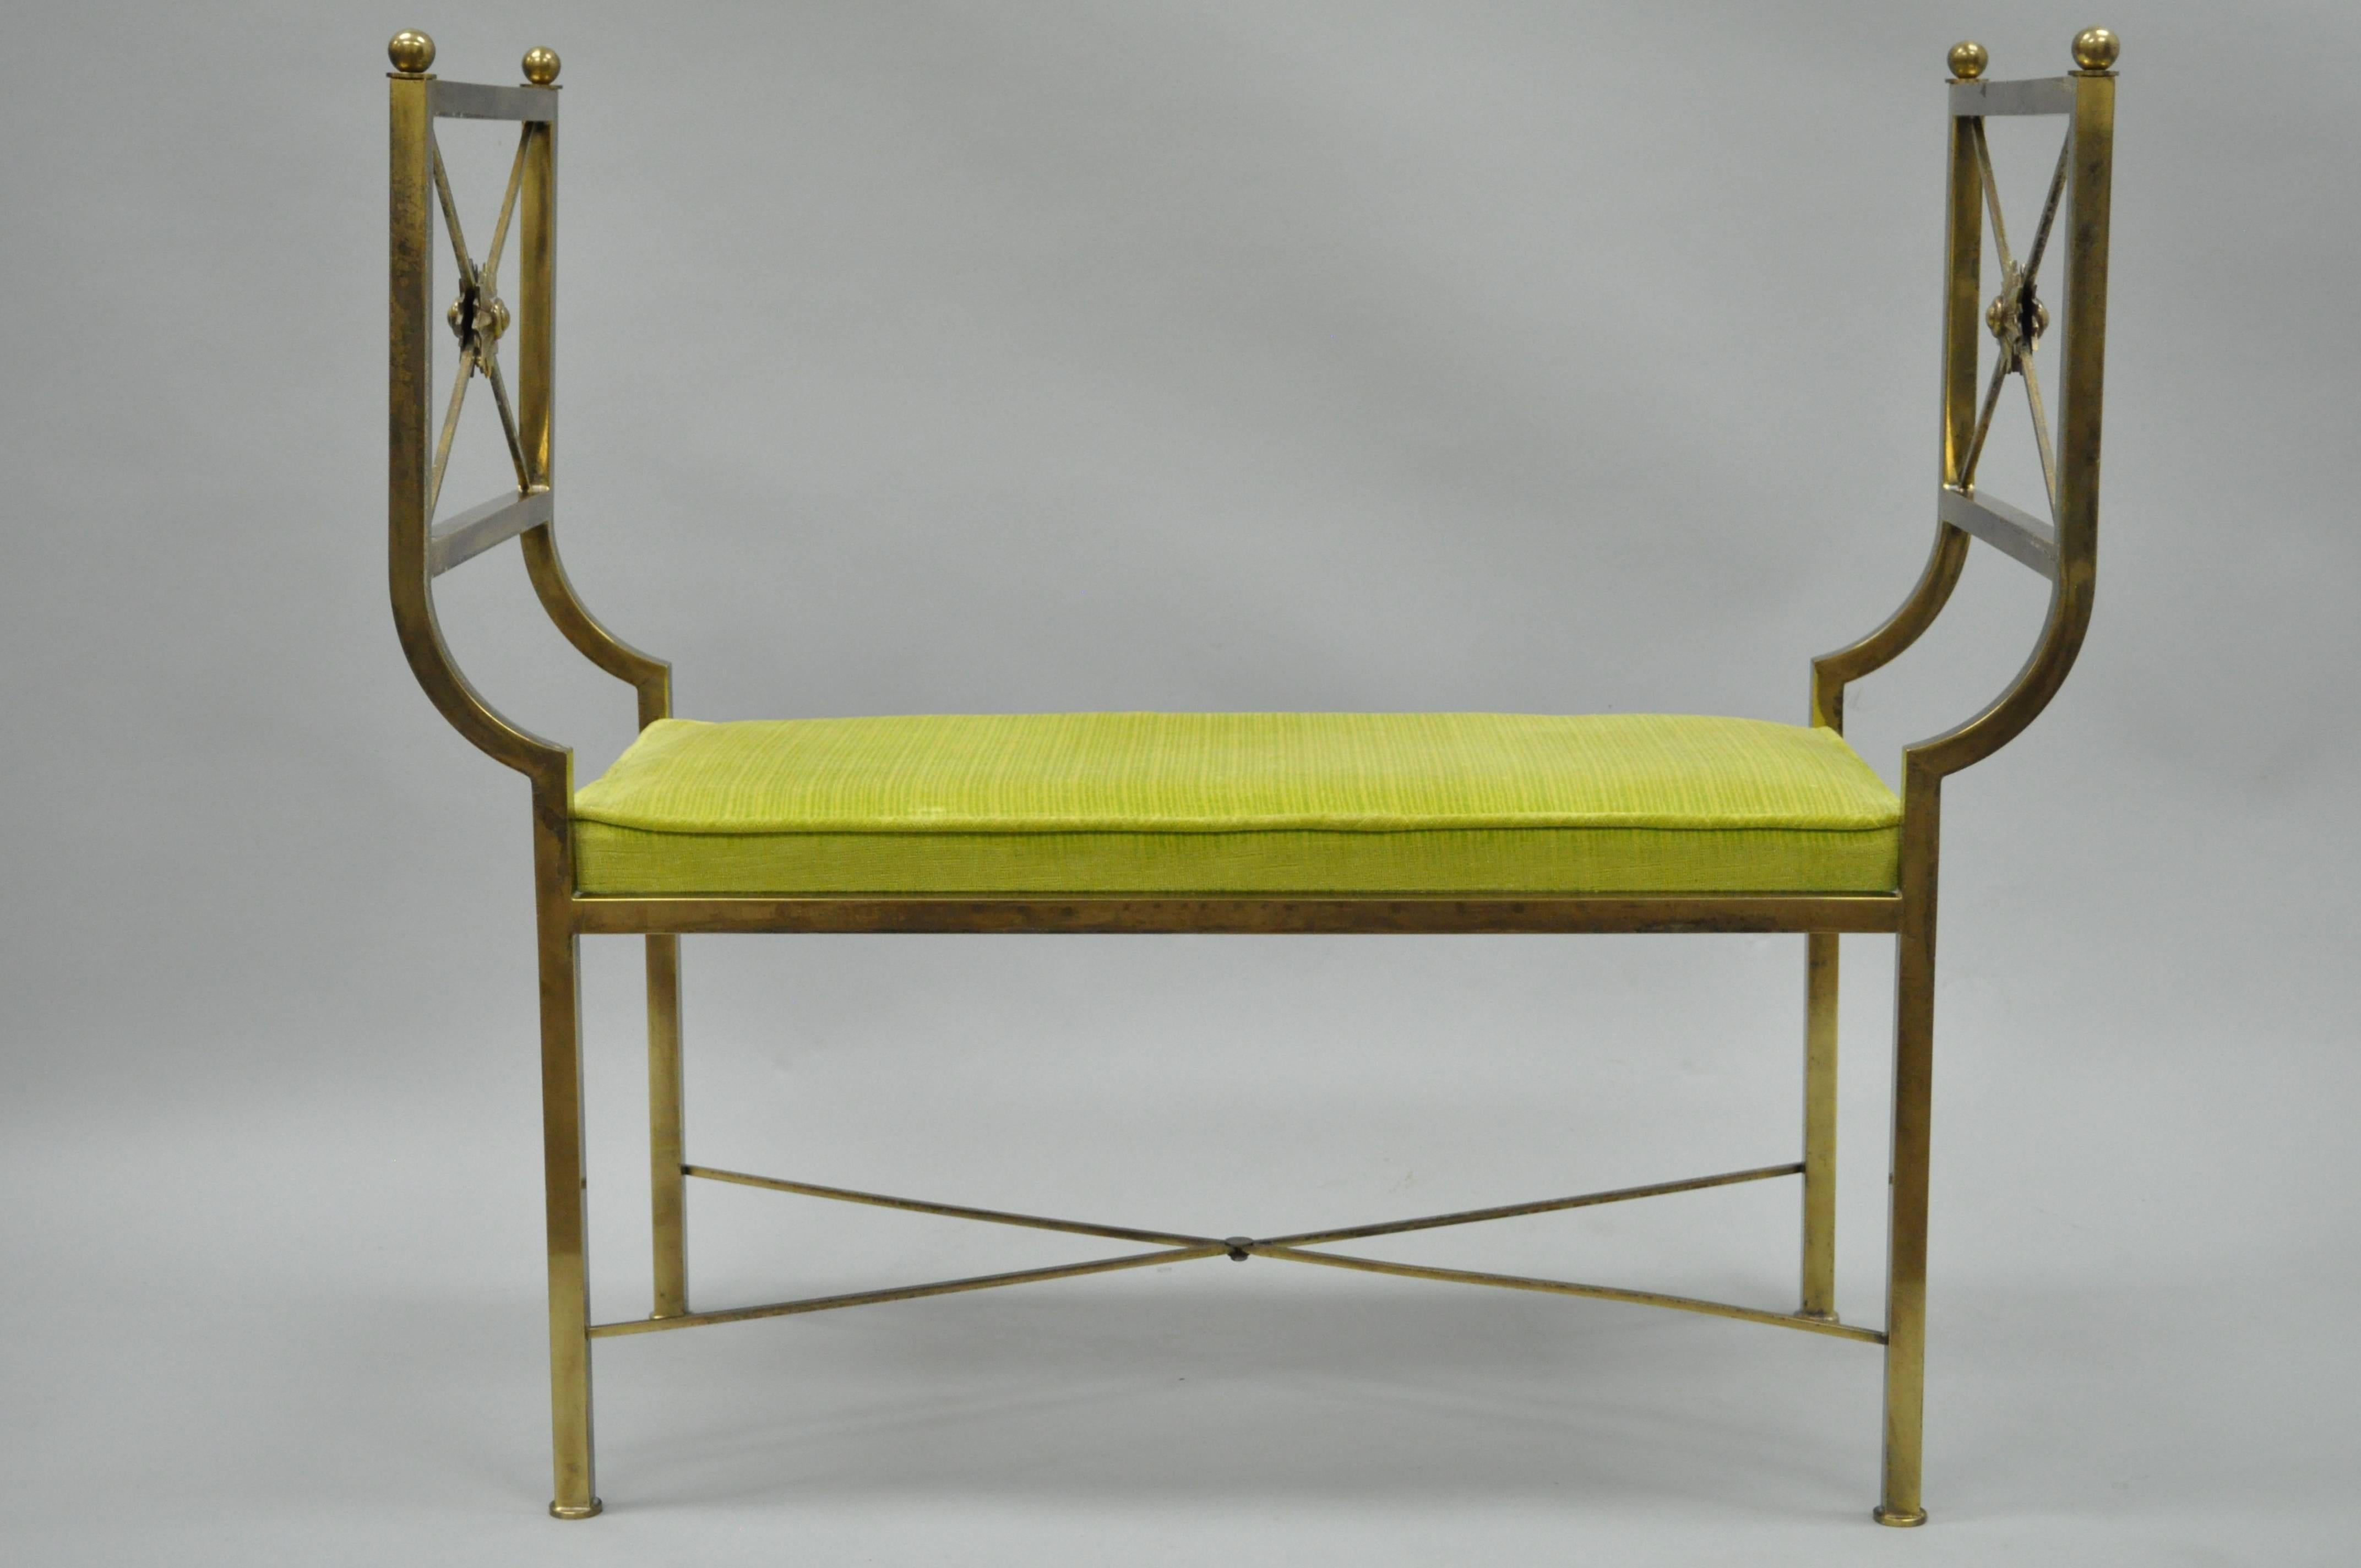 Very unique vintage brass X-Form bench in the Regency style. This item features an X-form stretcher base, clean lines and a burnished brass finish.